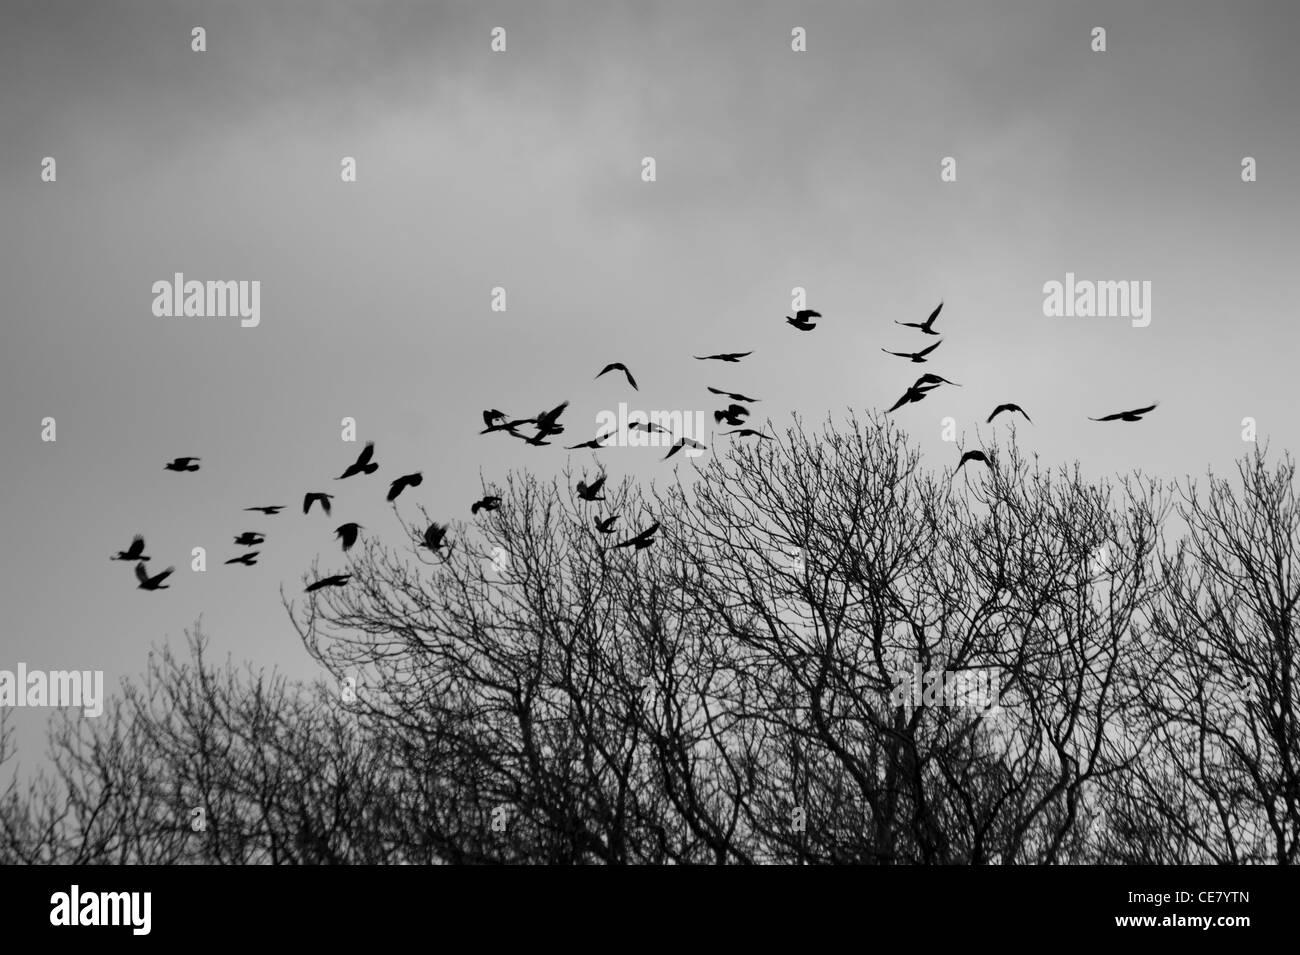 Rooks or crows flying around a rookery in a wood in stormy weather Stock Photo